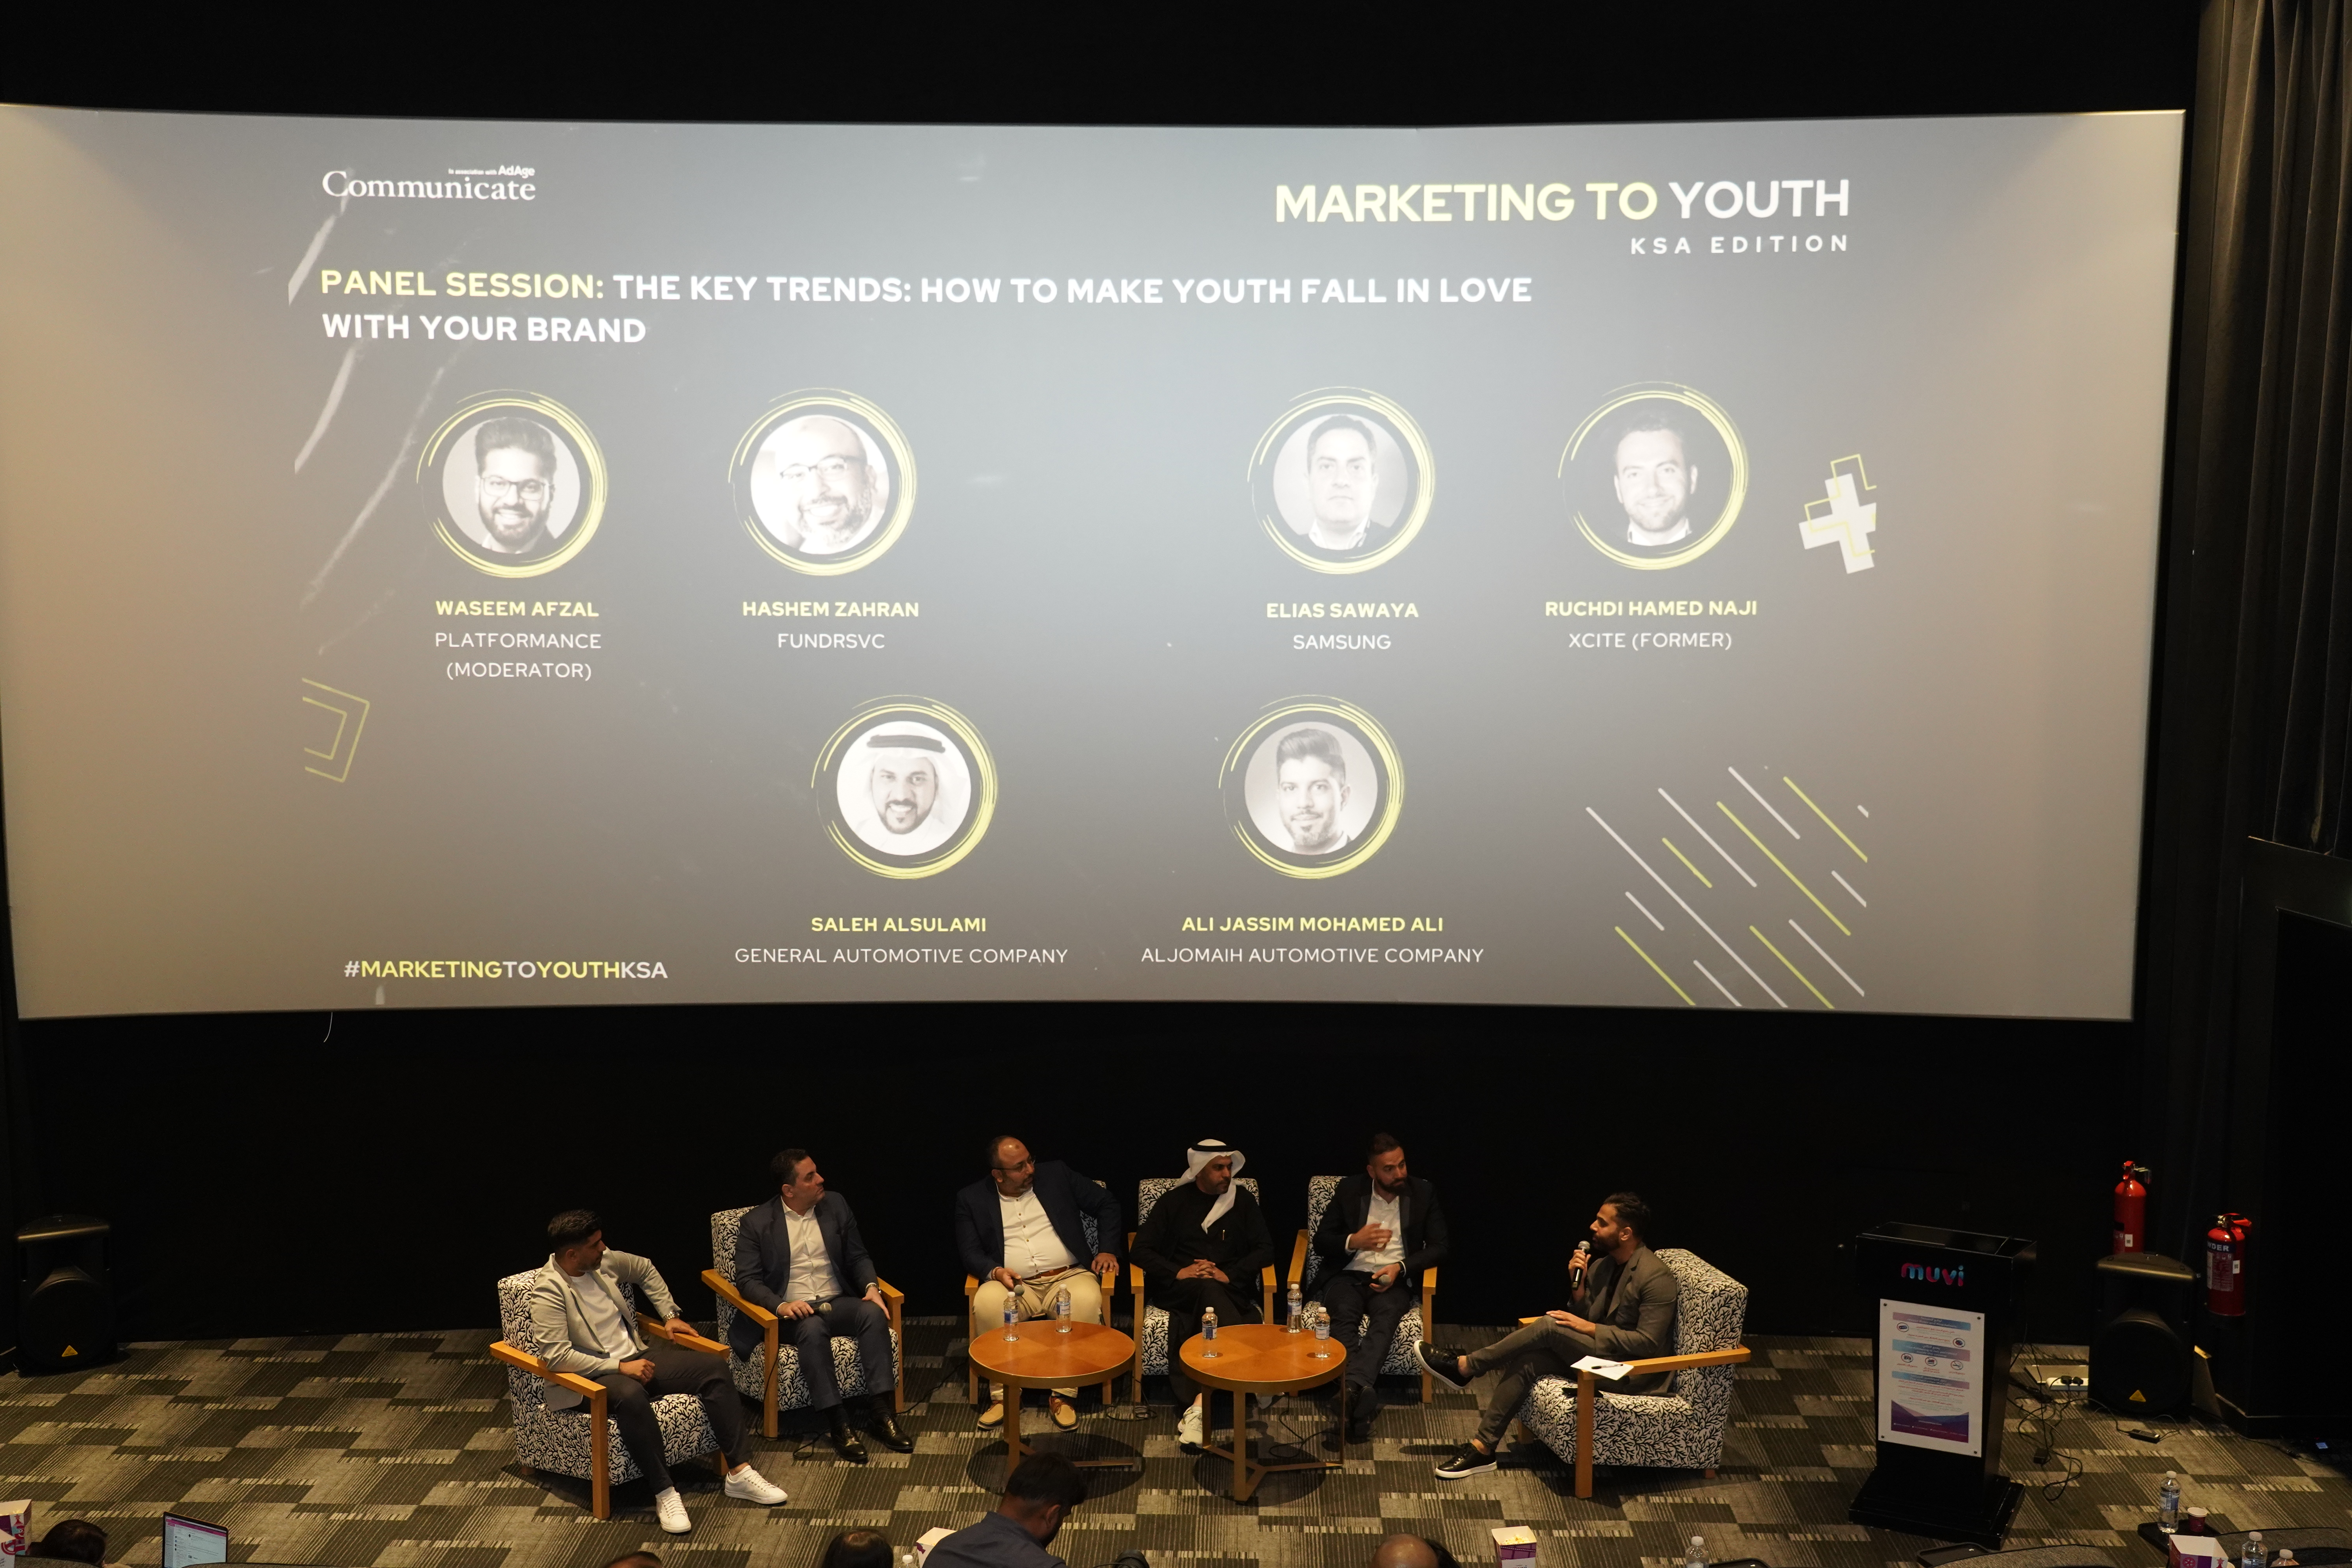 Video: Building an Effective Marketing Strategy for the Youth